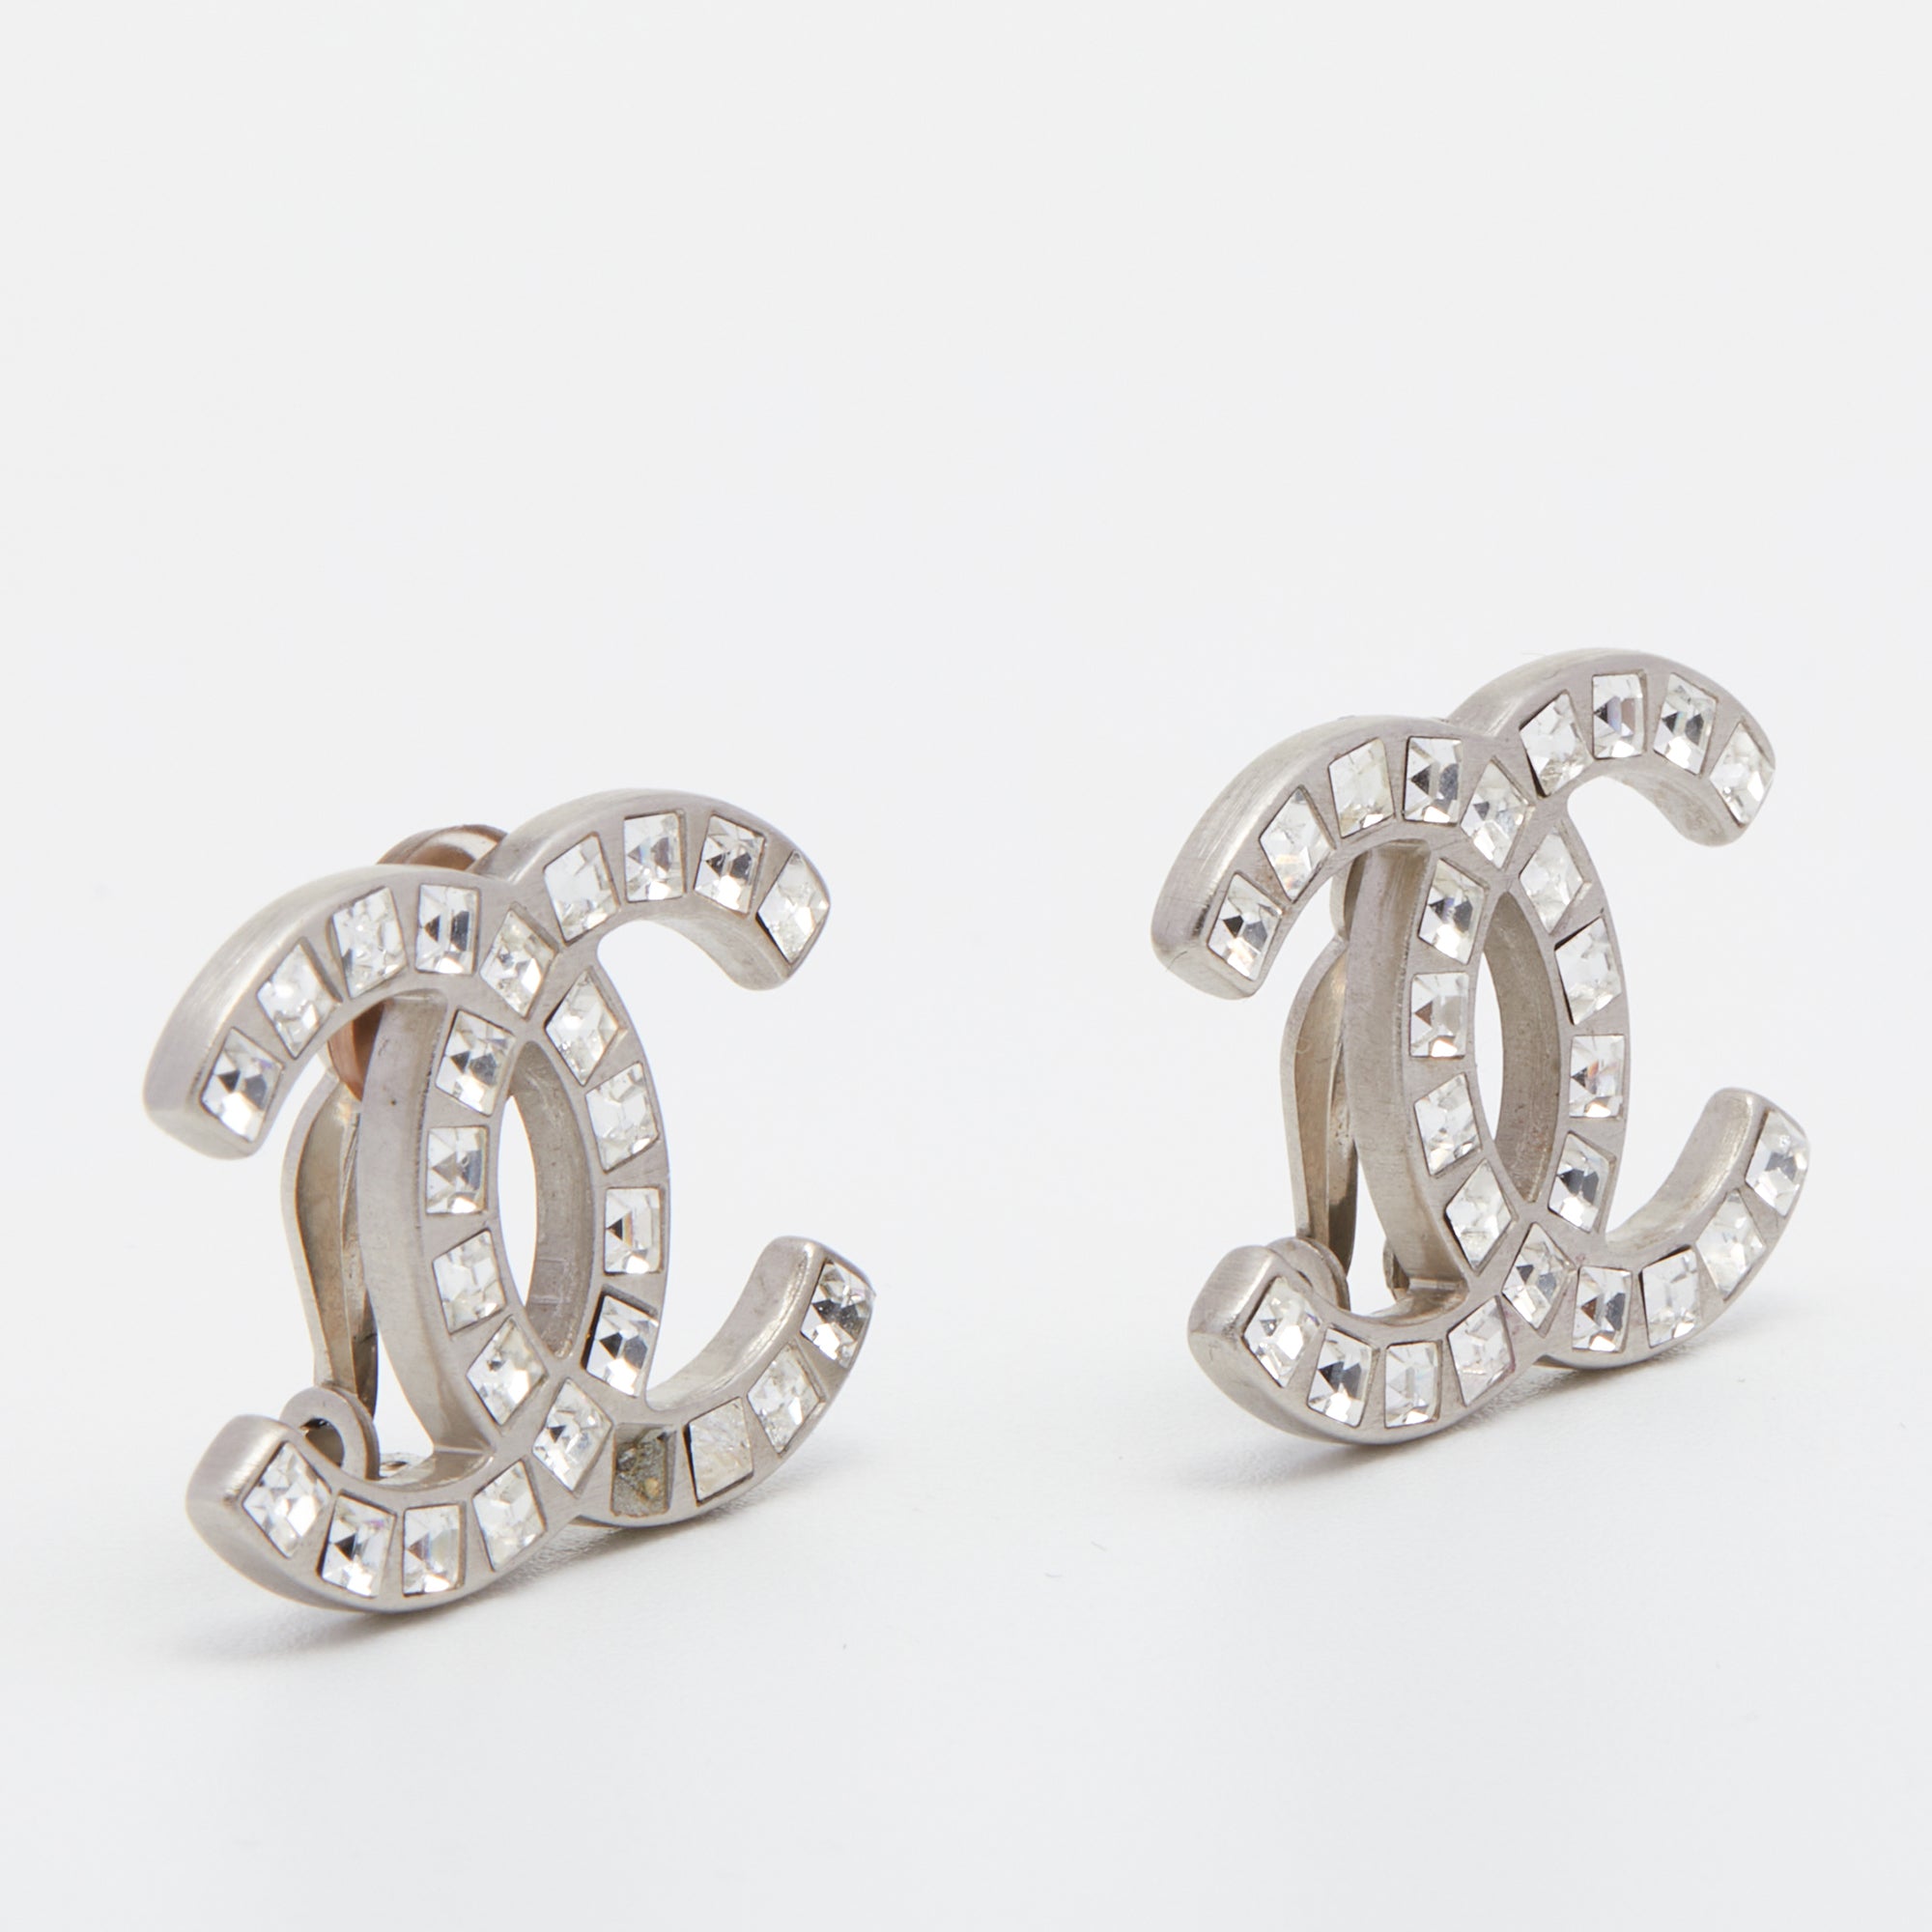 Chanel Silver Metal And Crystal CC Teardrop Earrings Available For  Immediate Sale At Sothebys